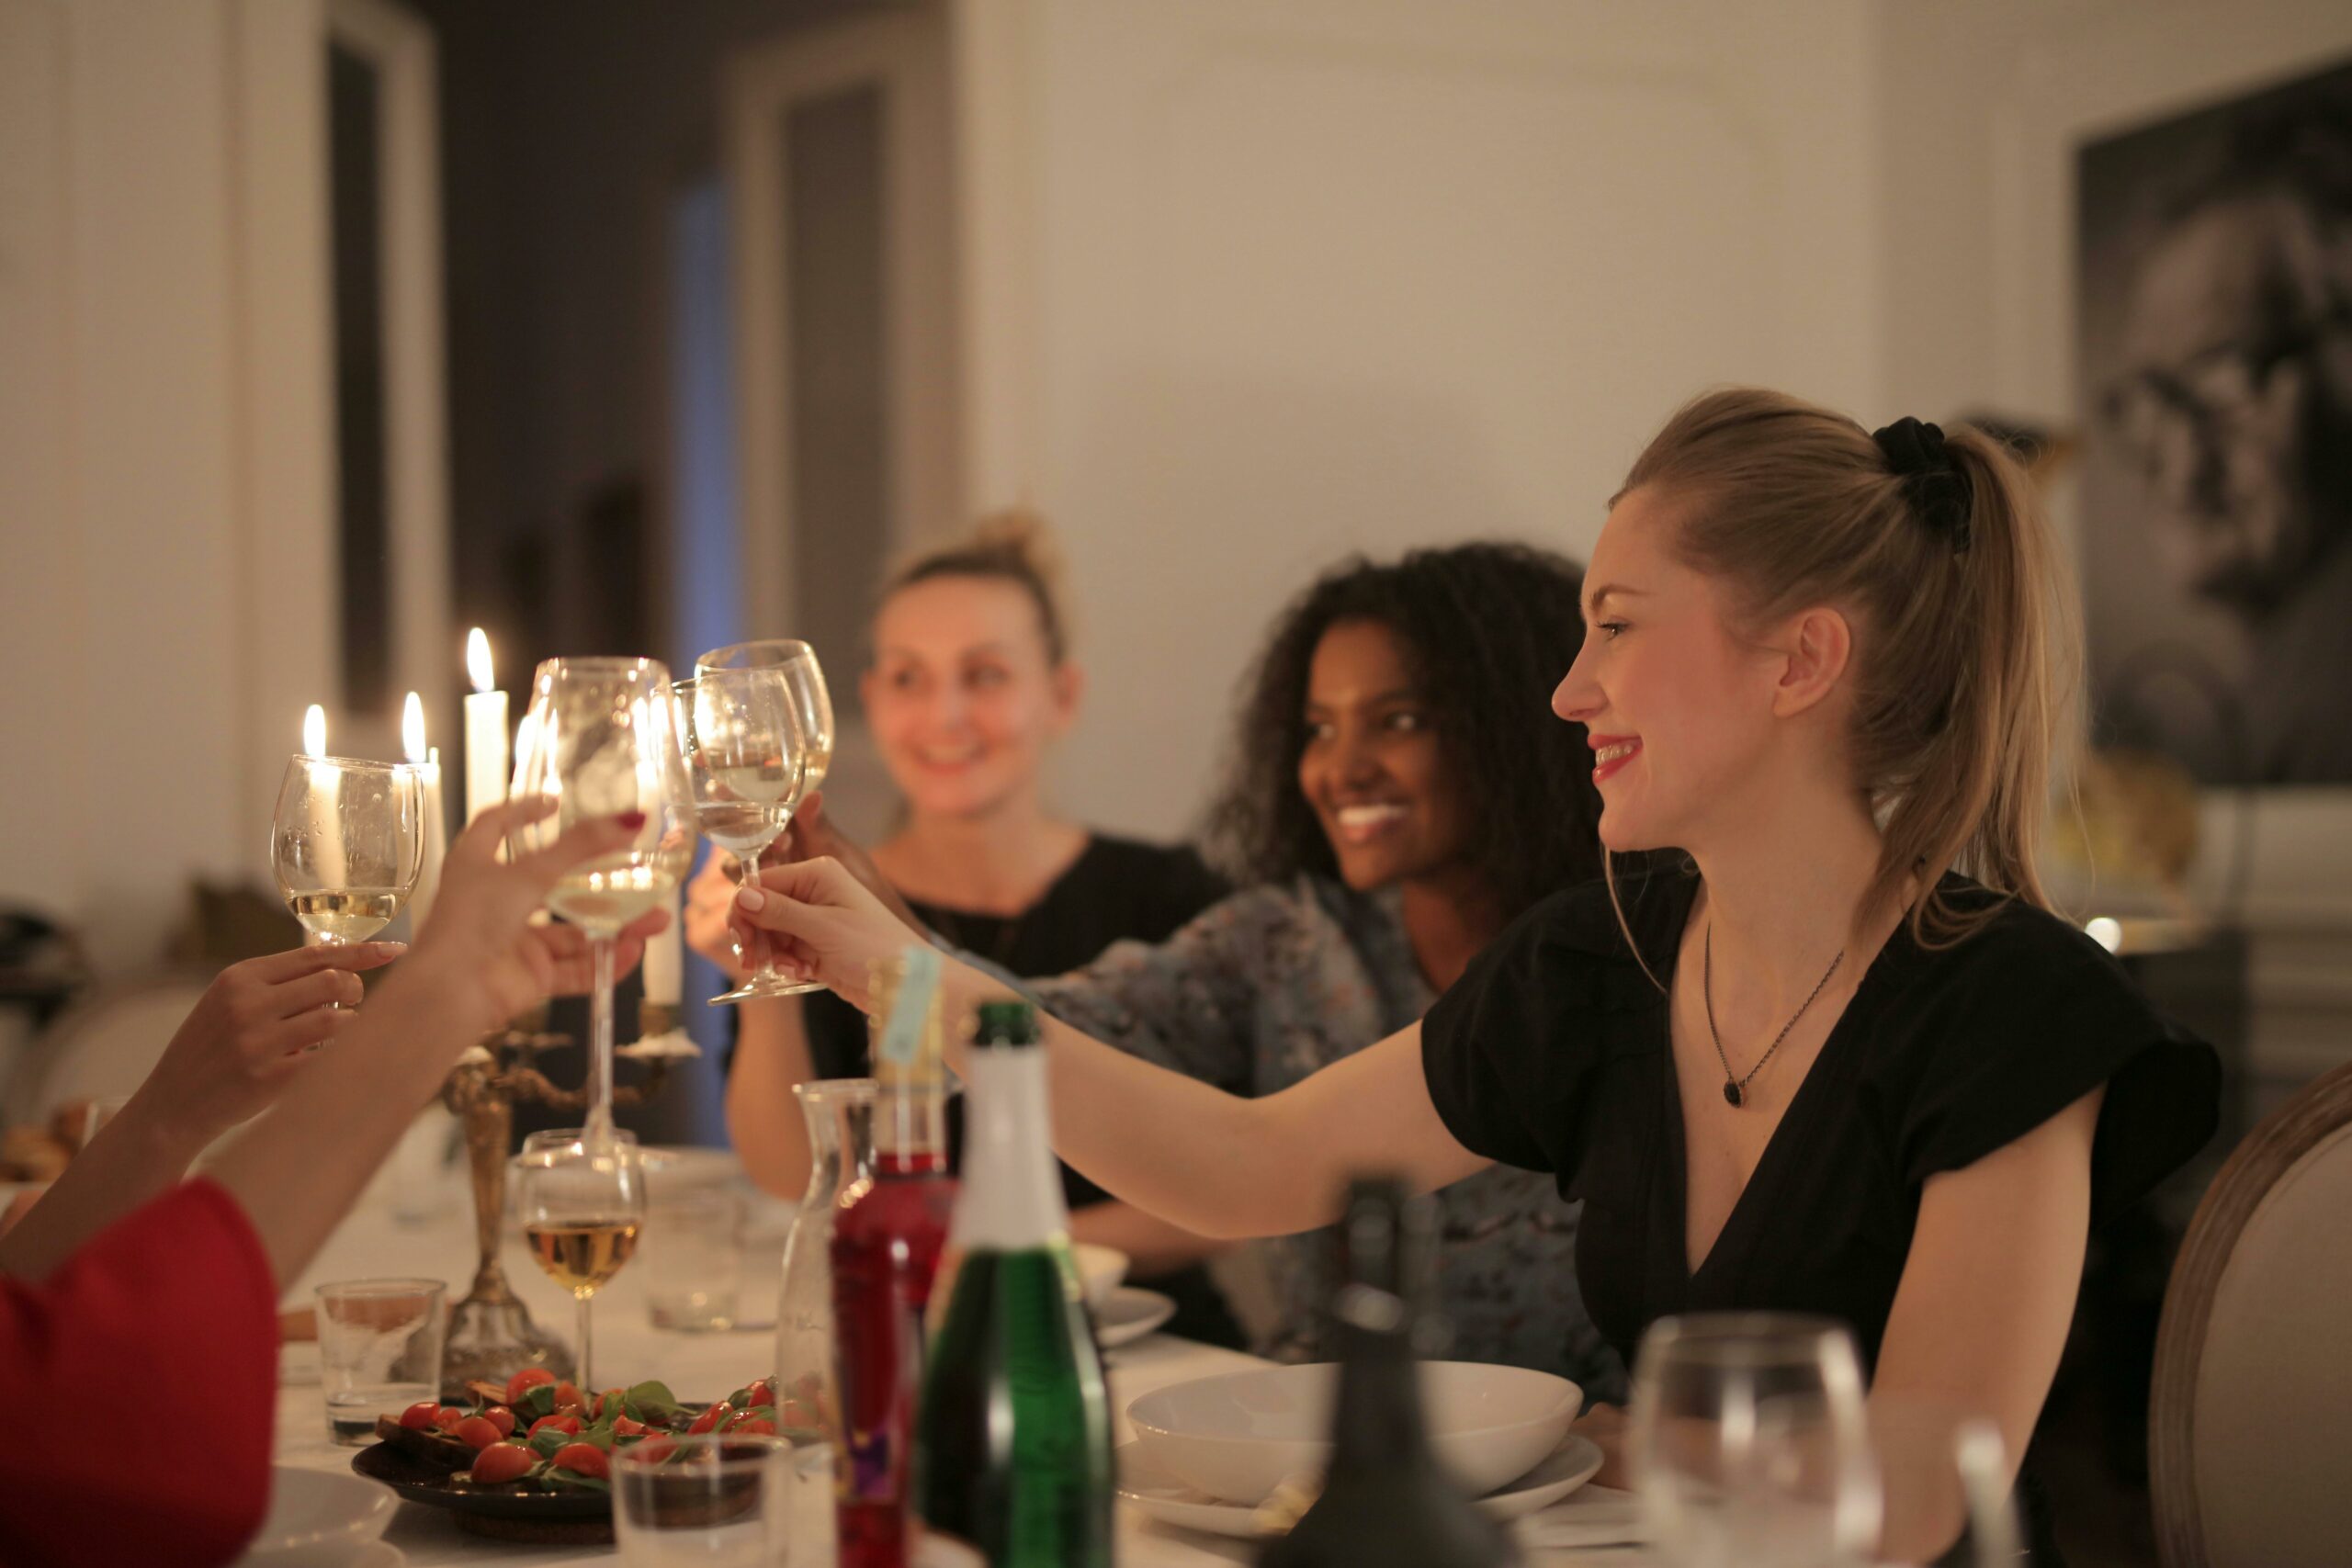 Women at a dinner party drinking wine and smiling near candlelight.